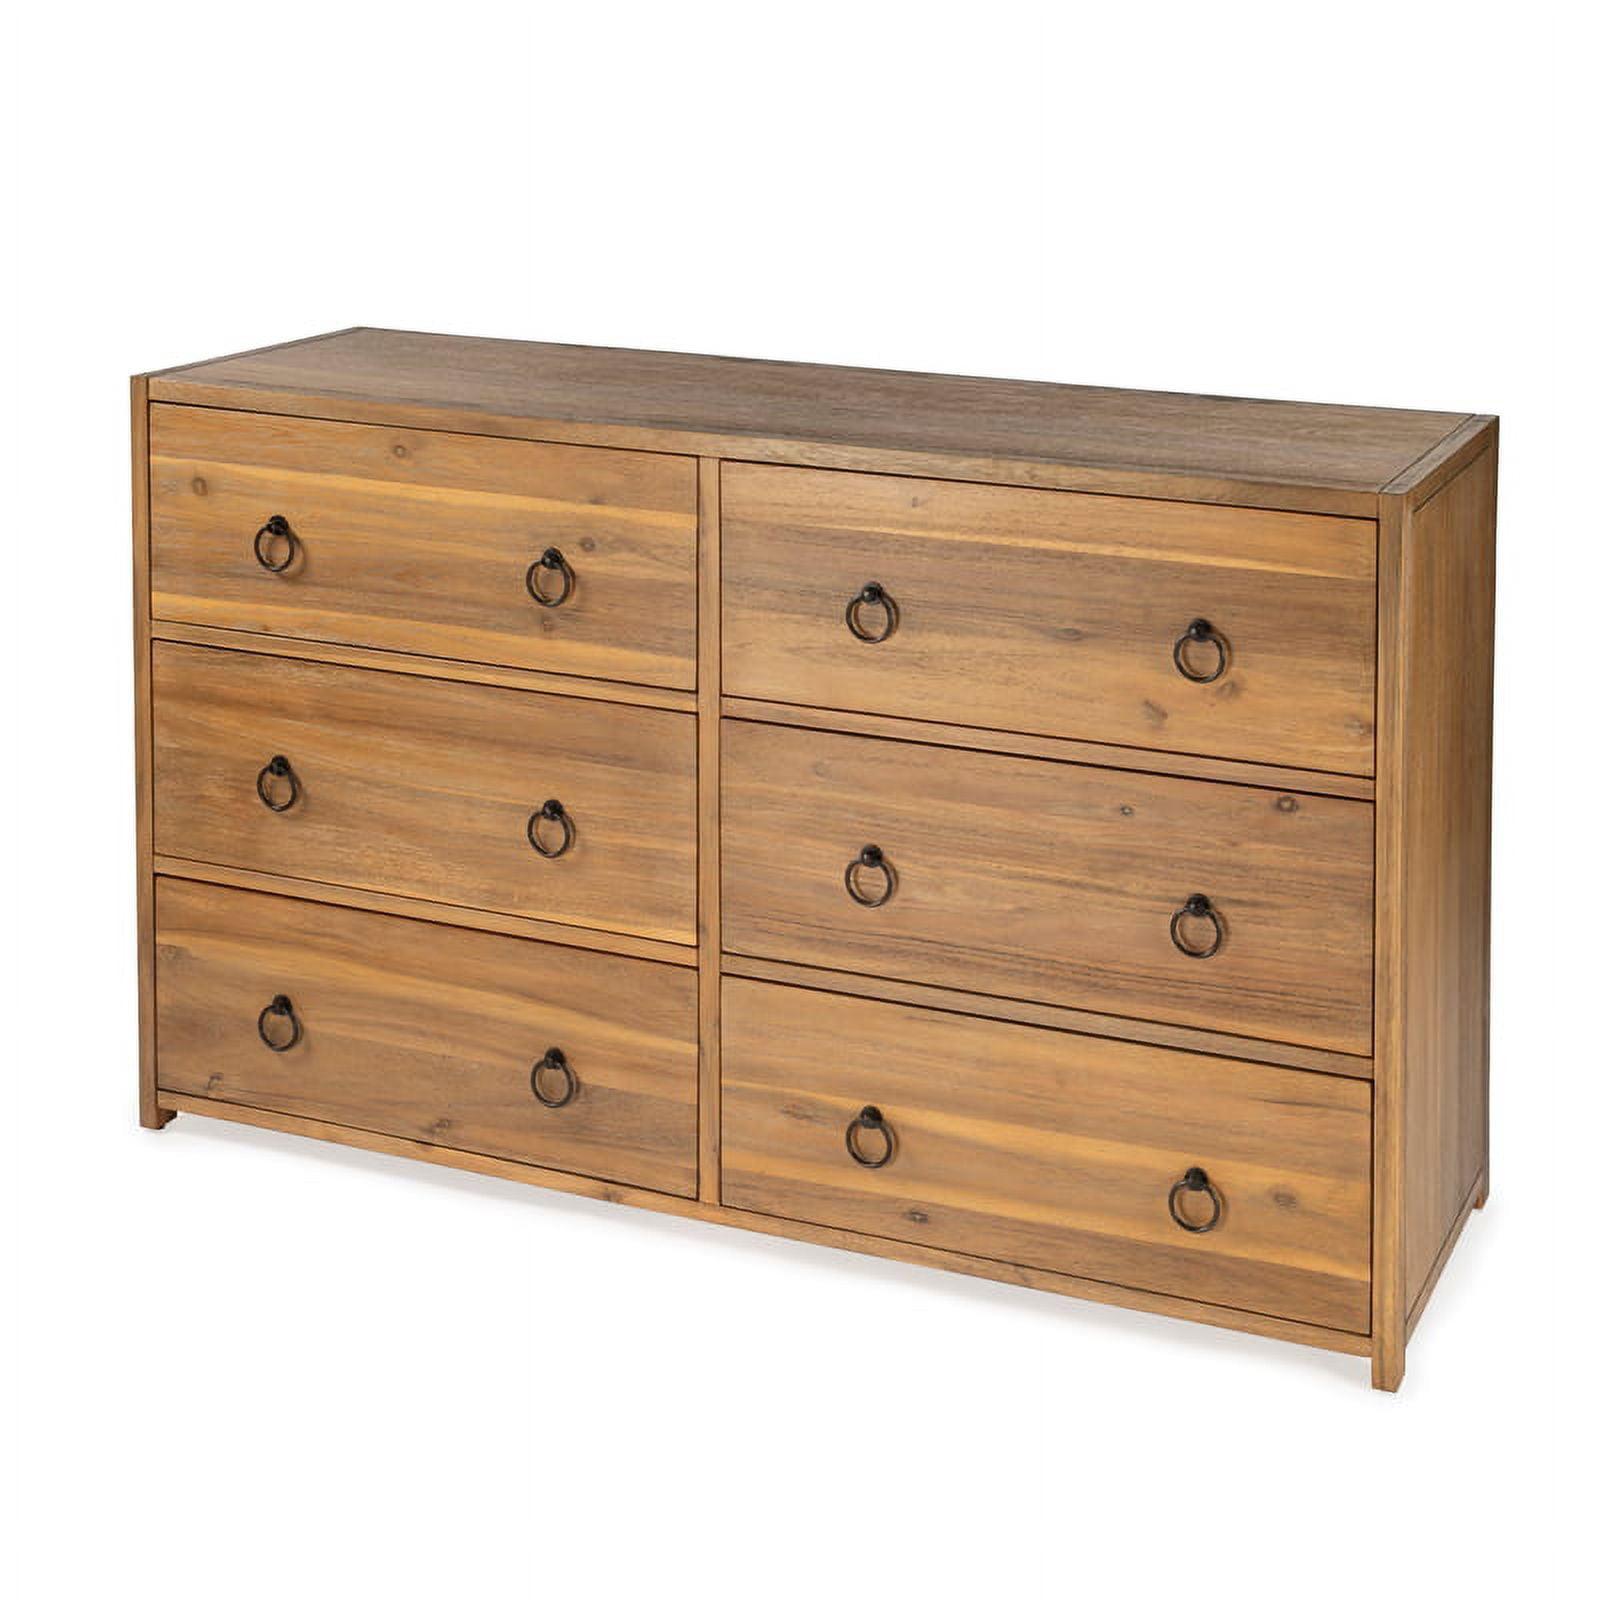 Natural Light Wood Double Dresser with Glam Ring Pulls and Dovetail Drawers